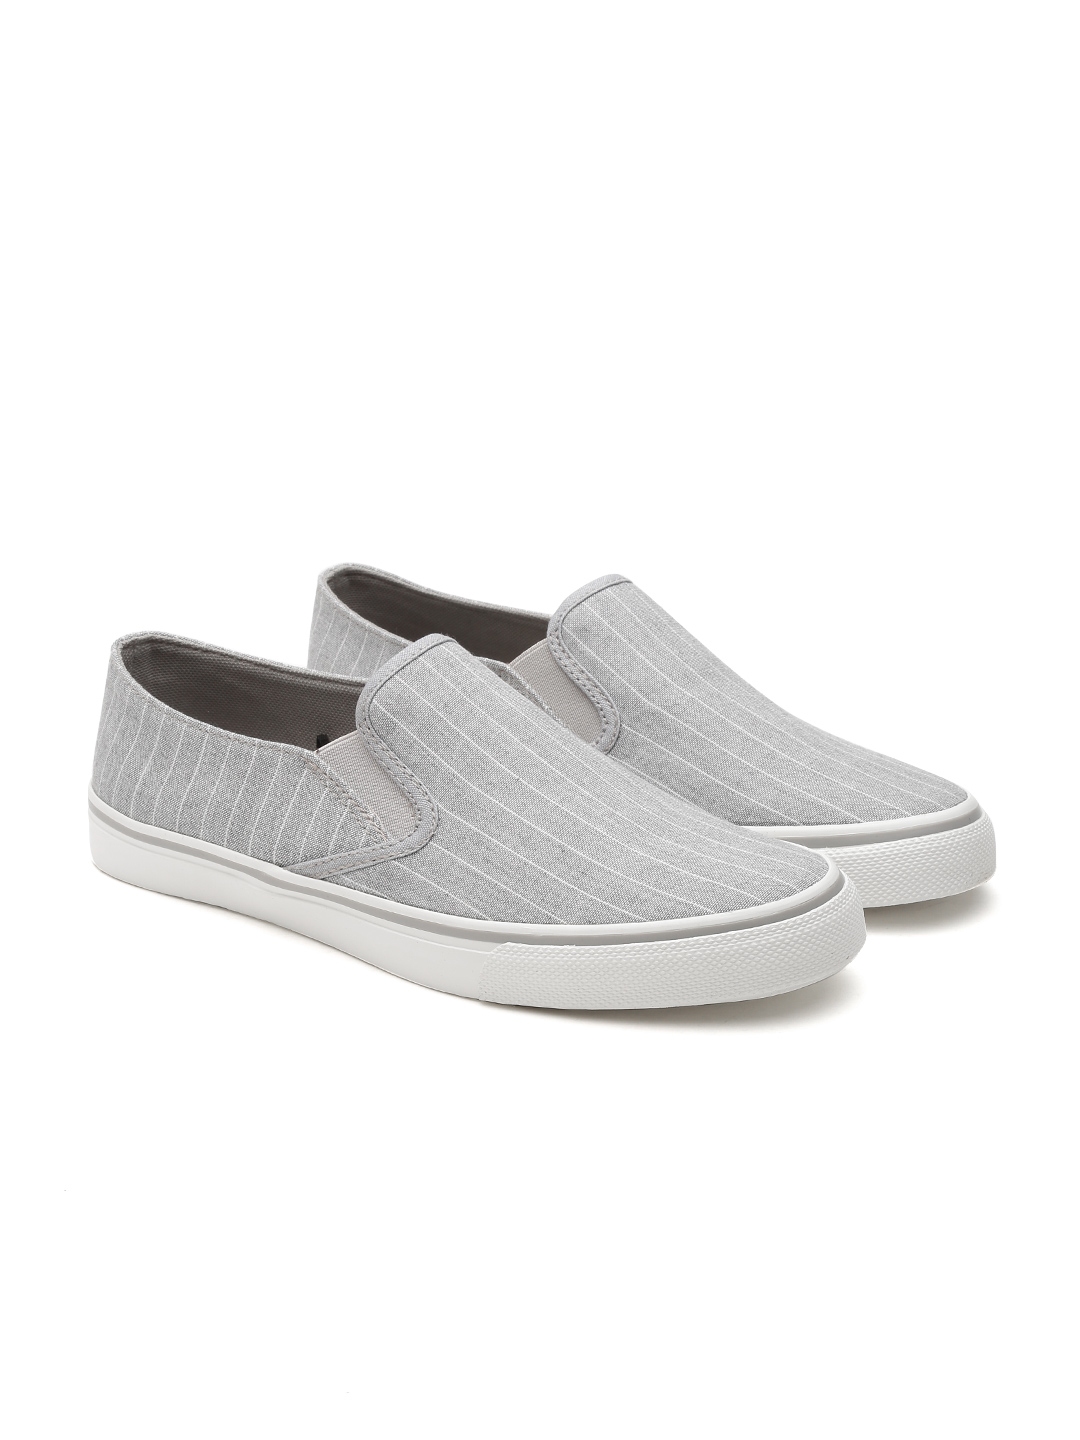 Buy United Colors Of Benetton Men Grey Slip On Sneakers - Casual Shoes ...